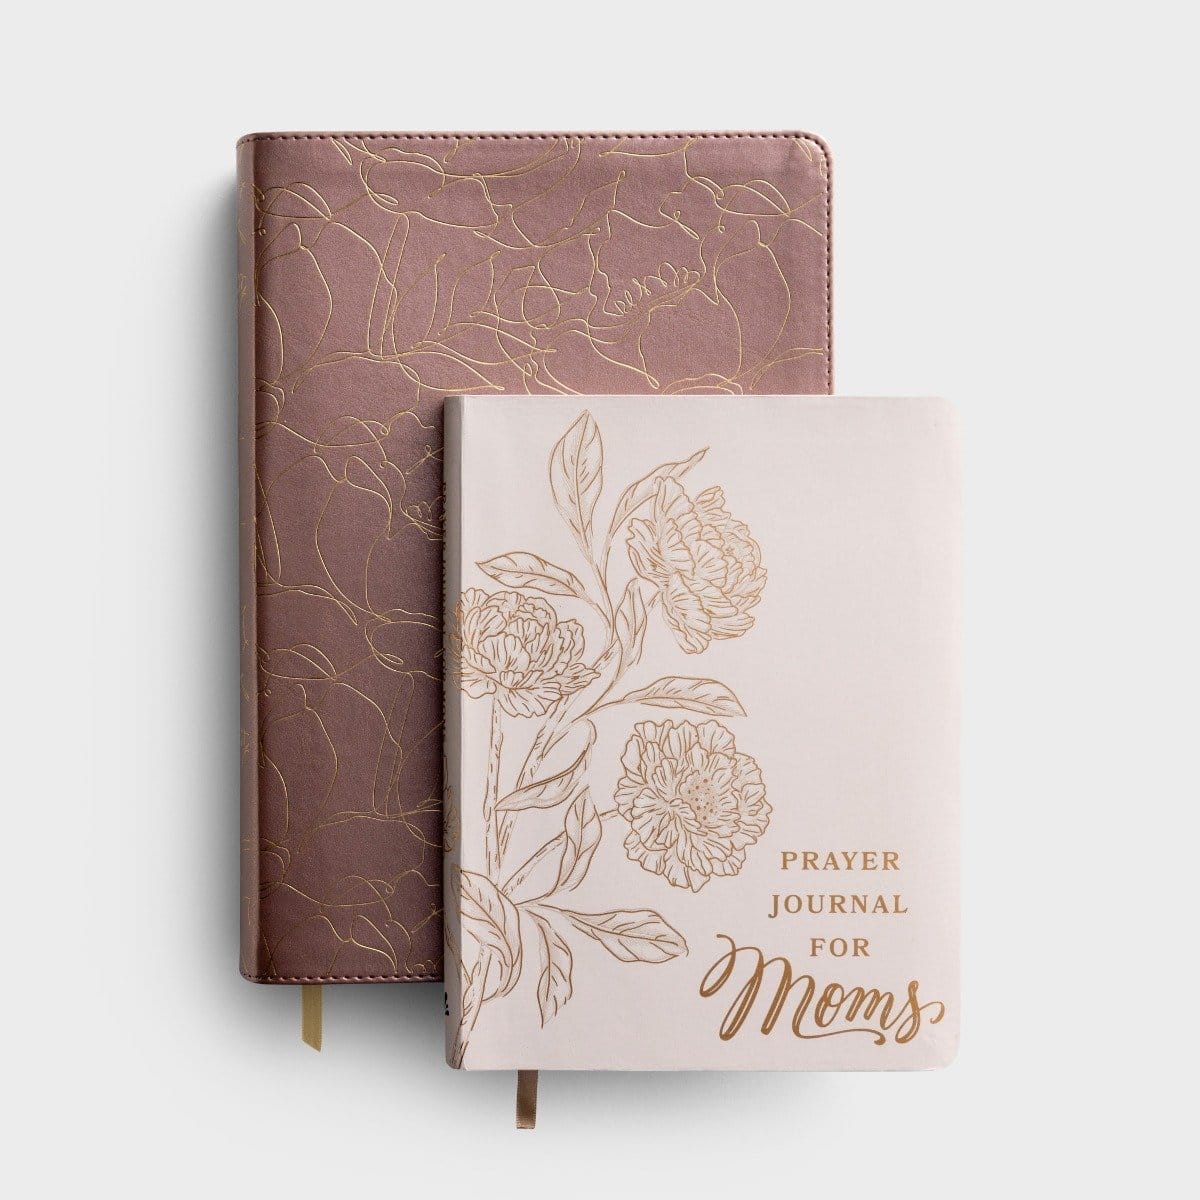 Signature Collection Super Giant Print Blush Floral Bible + Prayer Journal for Moms - Gift Set